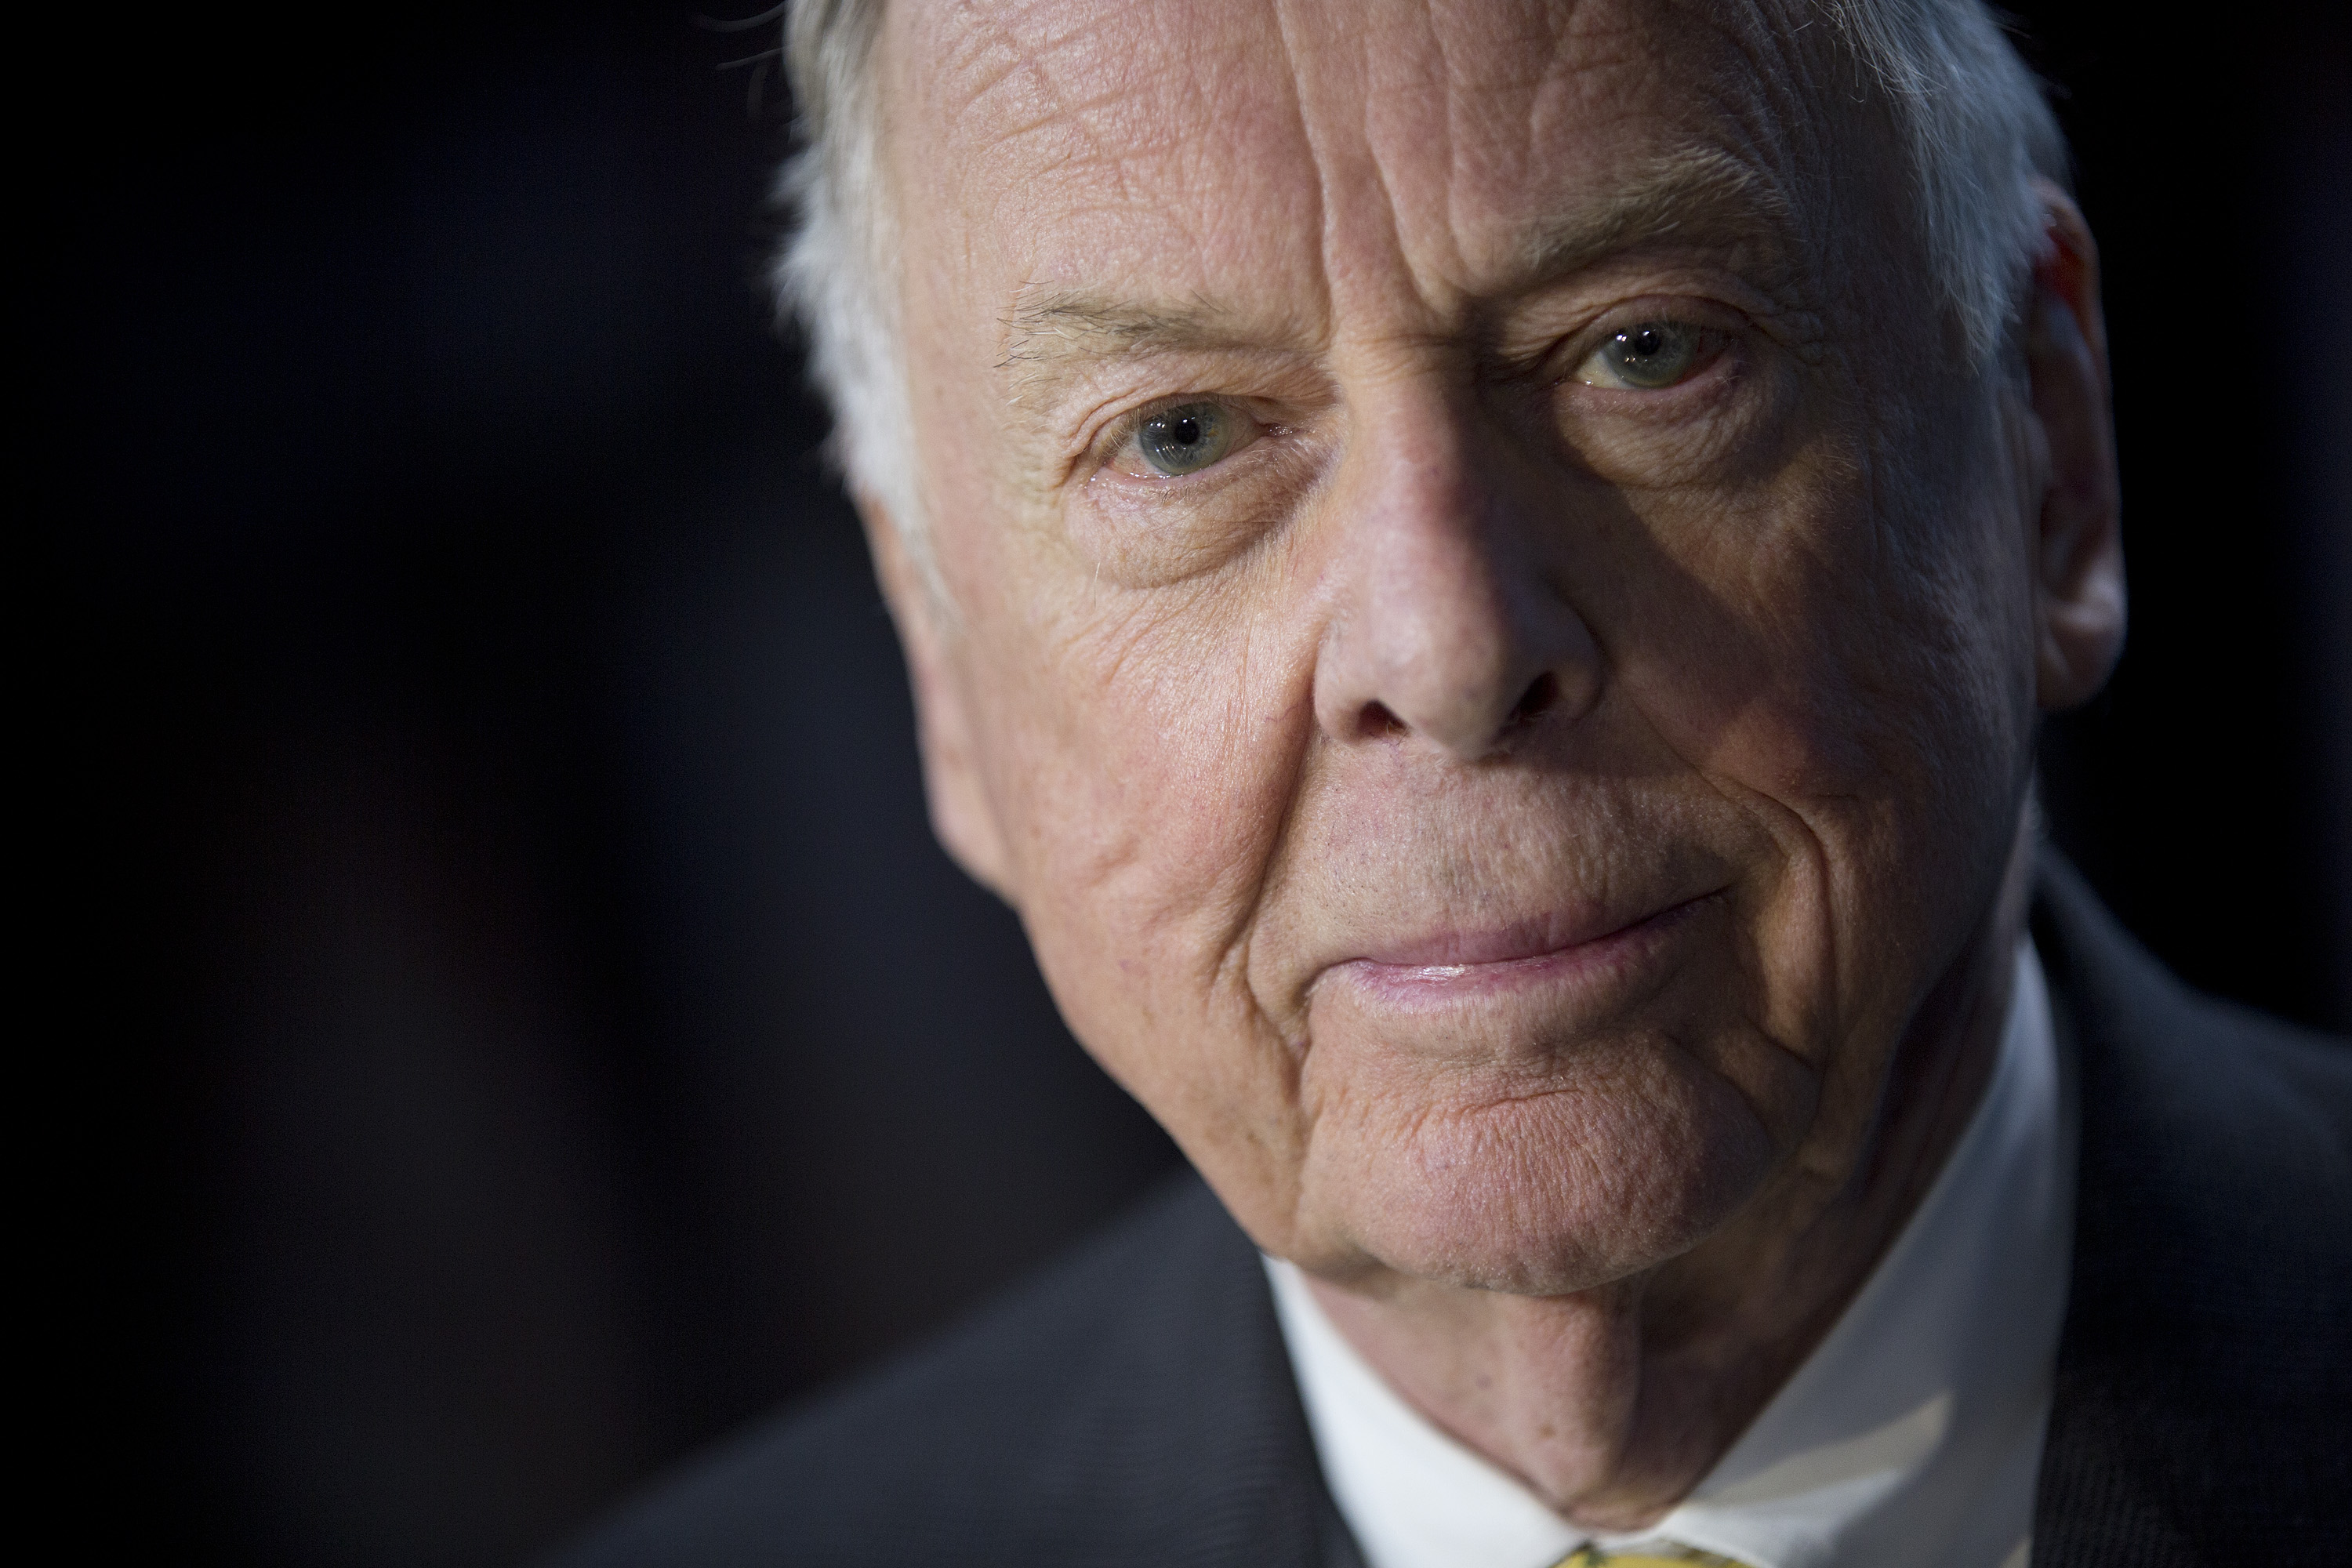 T. Boone Pickens, founder and chief executive officer of BP Capital LLC, sits for a photograph following a Bloomberg Television interview in Washington, D.C. on April 3, 2013. (Bloomberg via Getty Images)